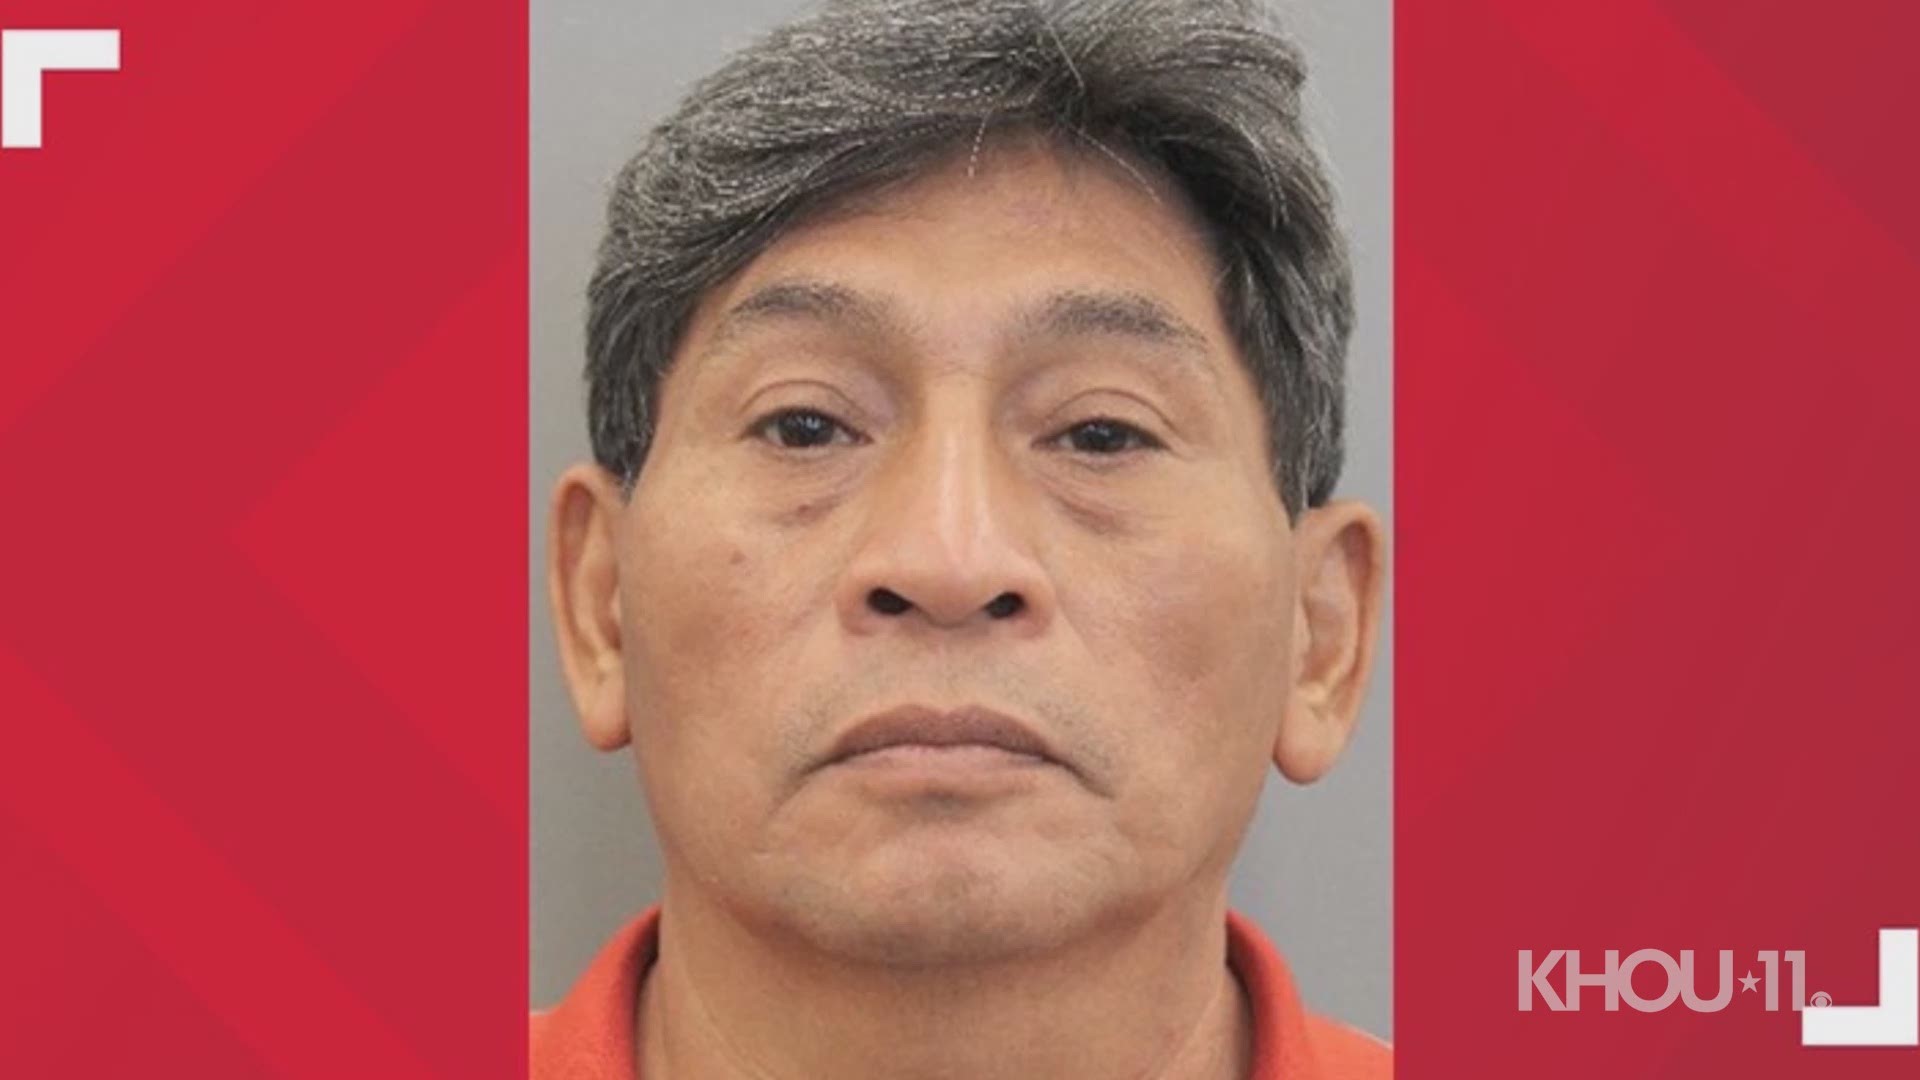 Jose Abel Mena, 60, is charged with continuous sexual abuse of a child